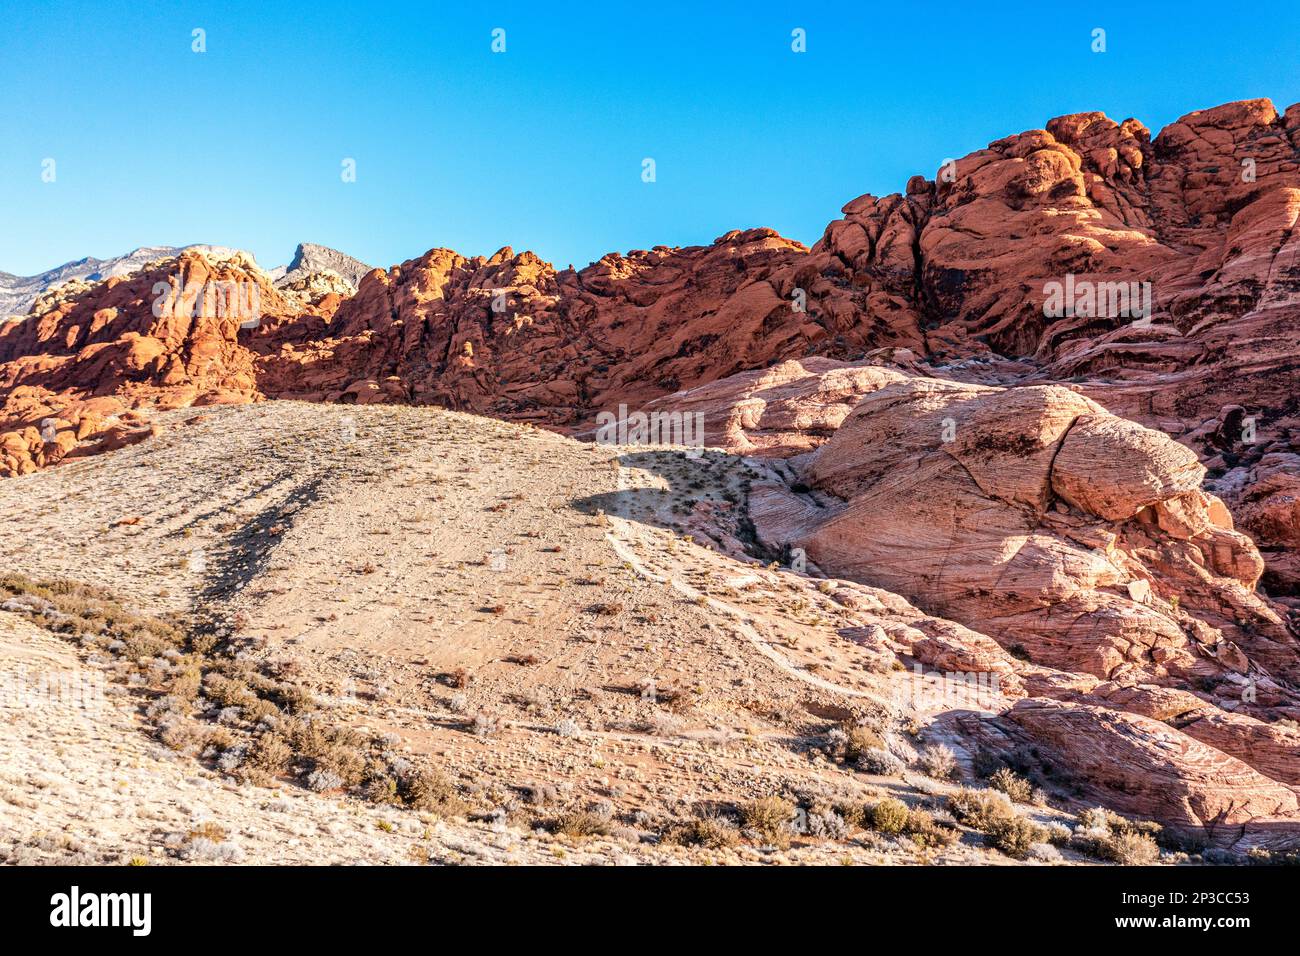 A beautiful, arid, rugged and mountainous scene in the wilderness of Red Rock Canyon in Las Vegas, Nevada, where families travel for adventure. Stock Photo